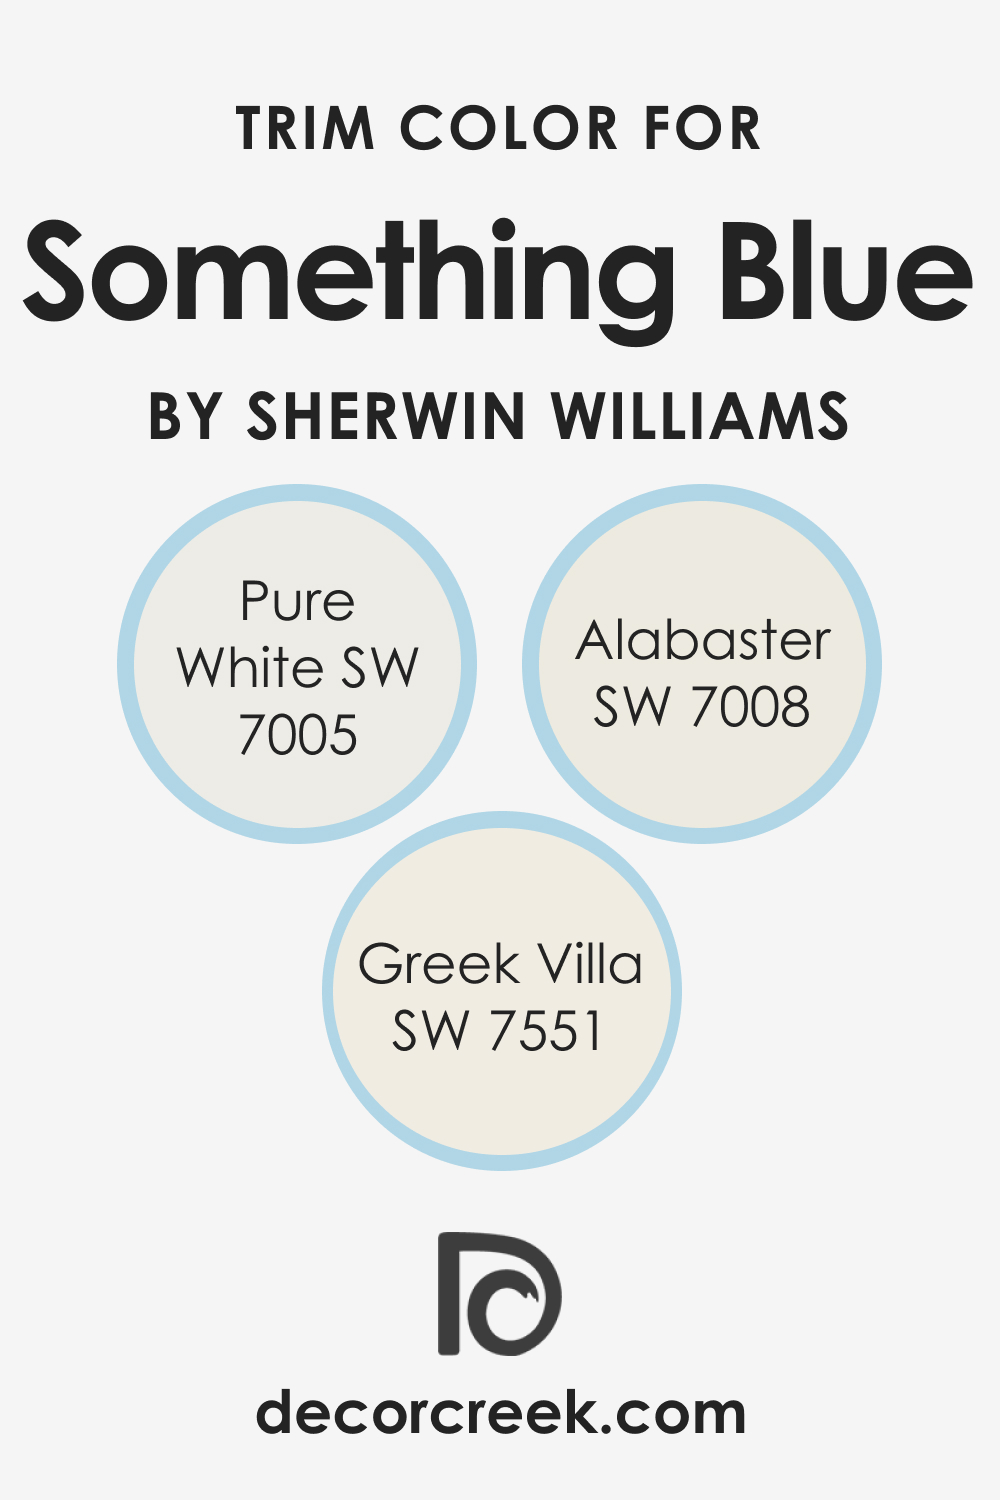 Trim Colors of SW 6800 Something Blue